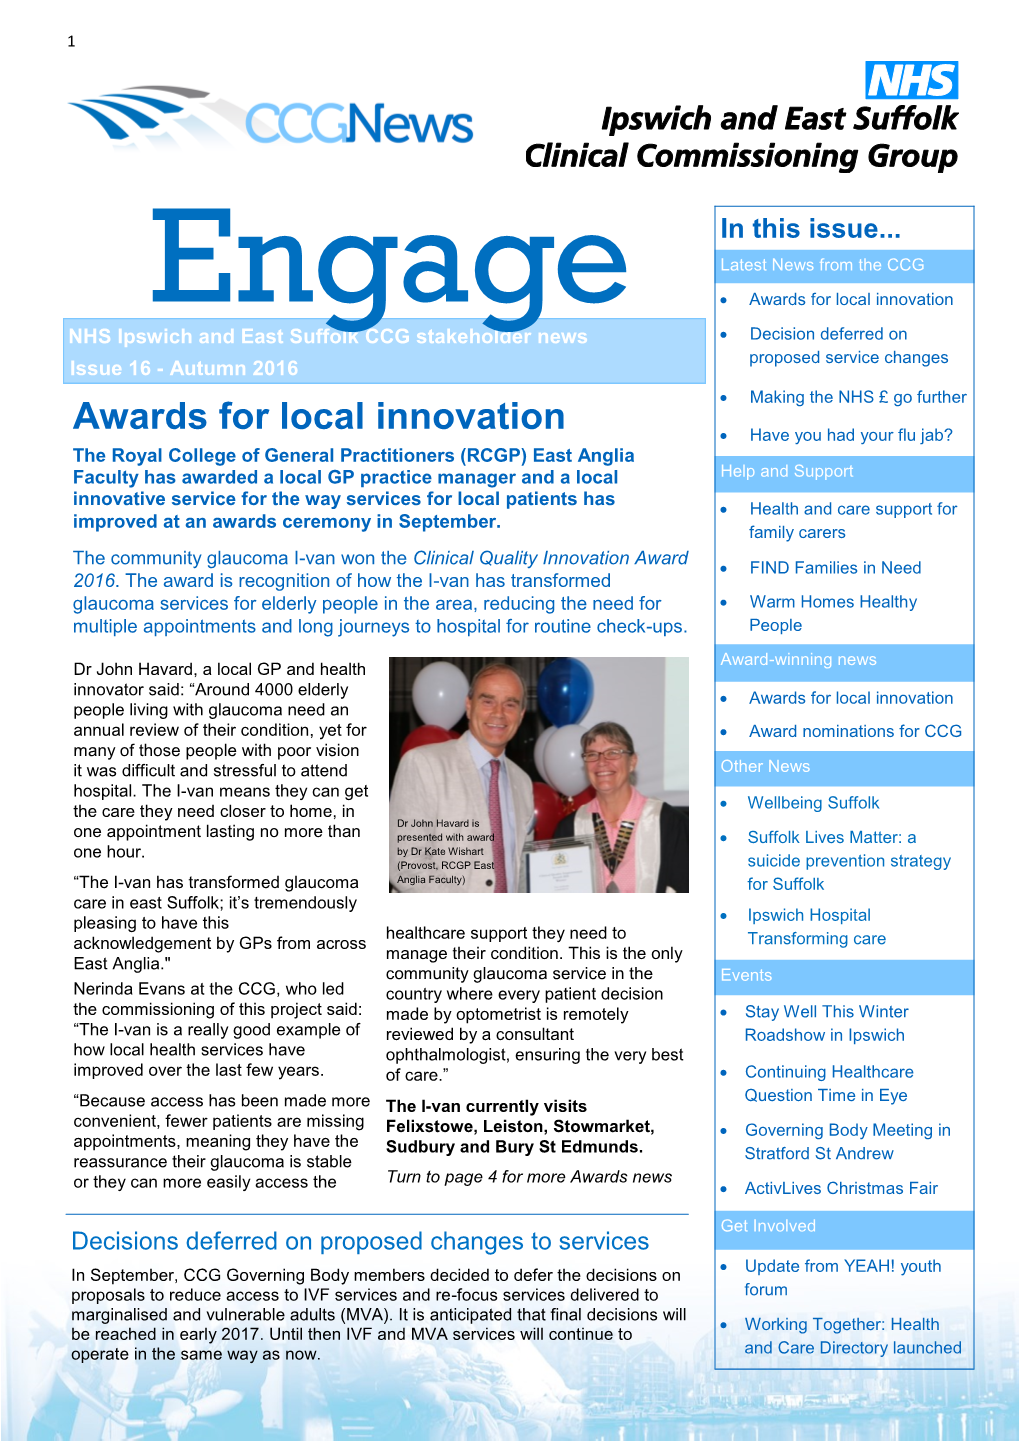 Awards for Local Innovation